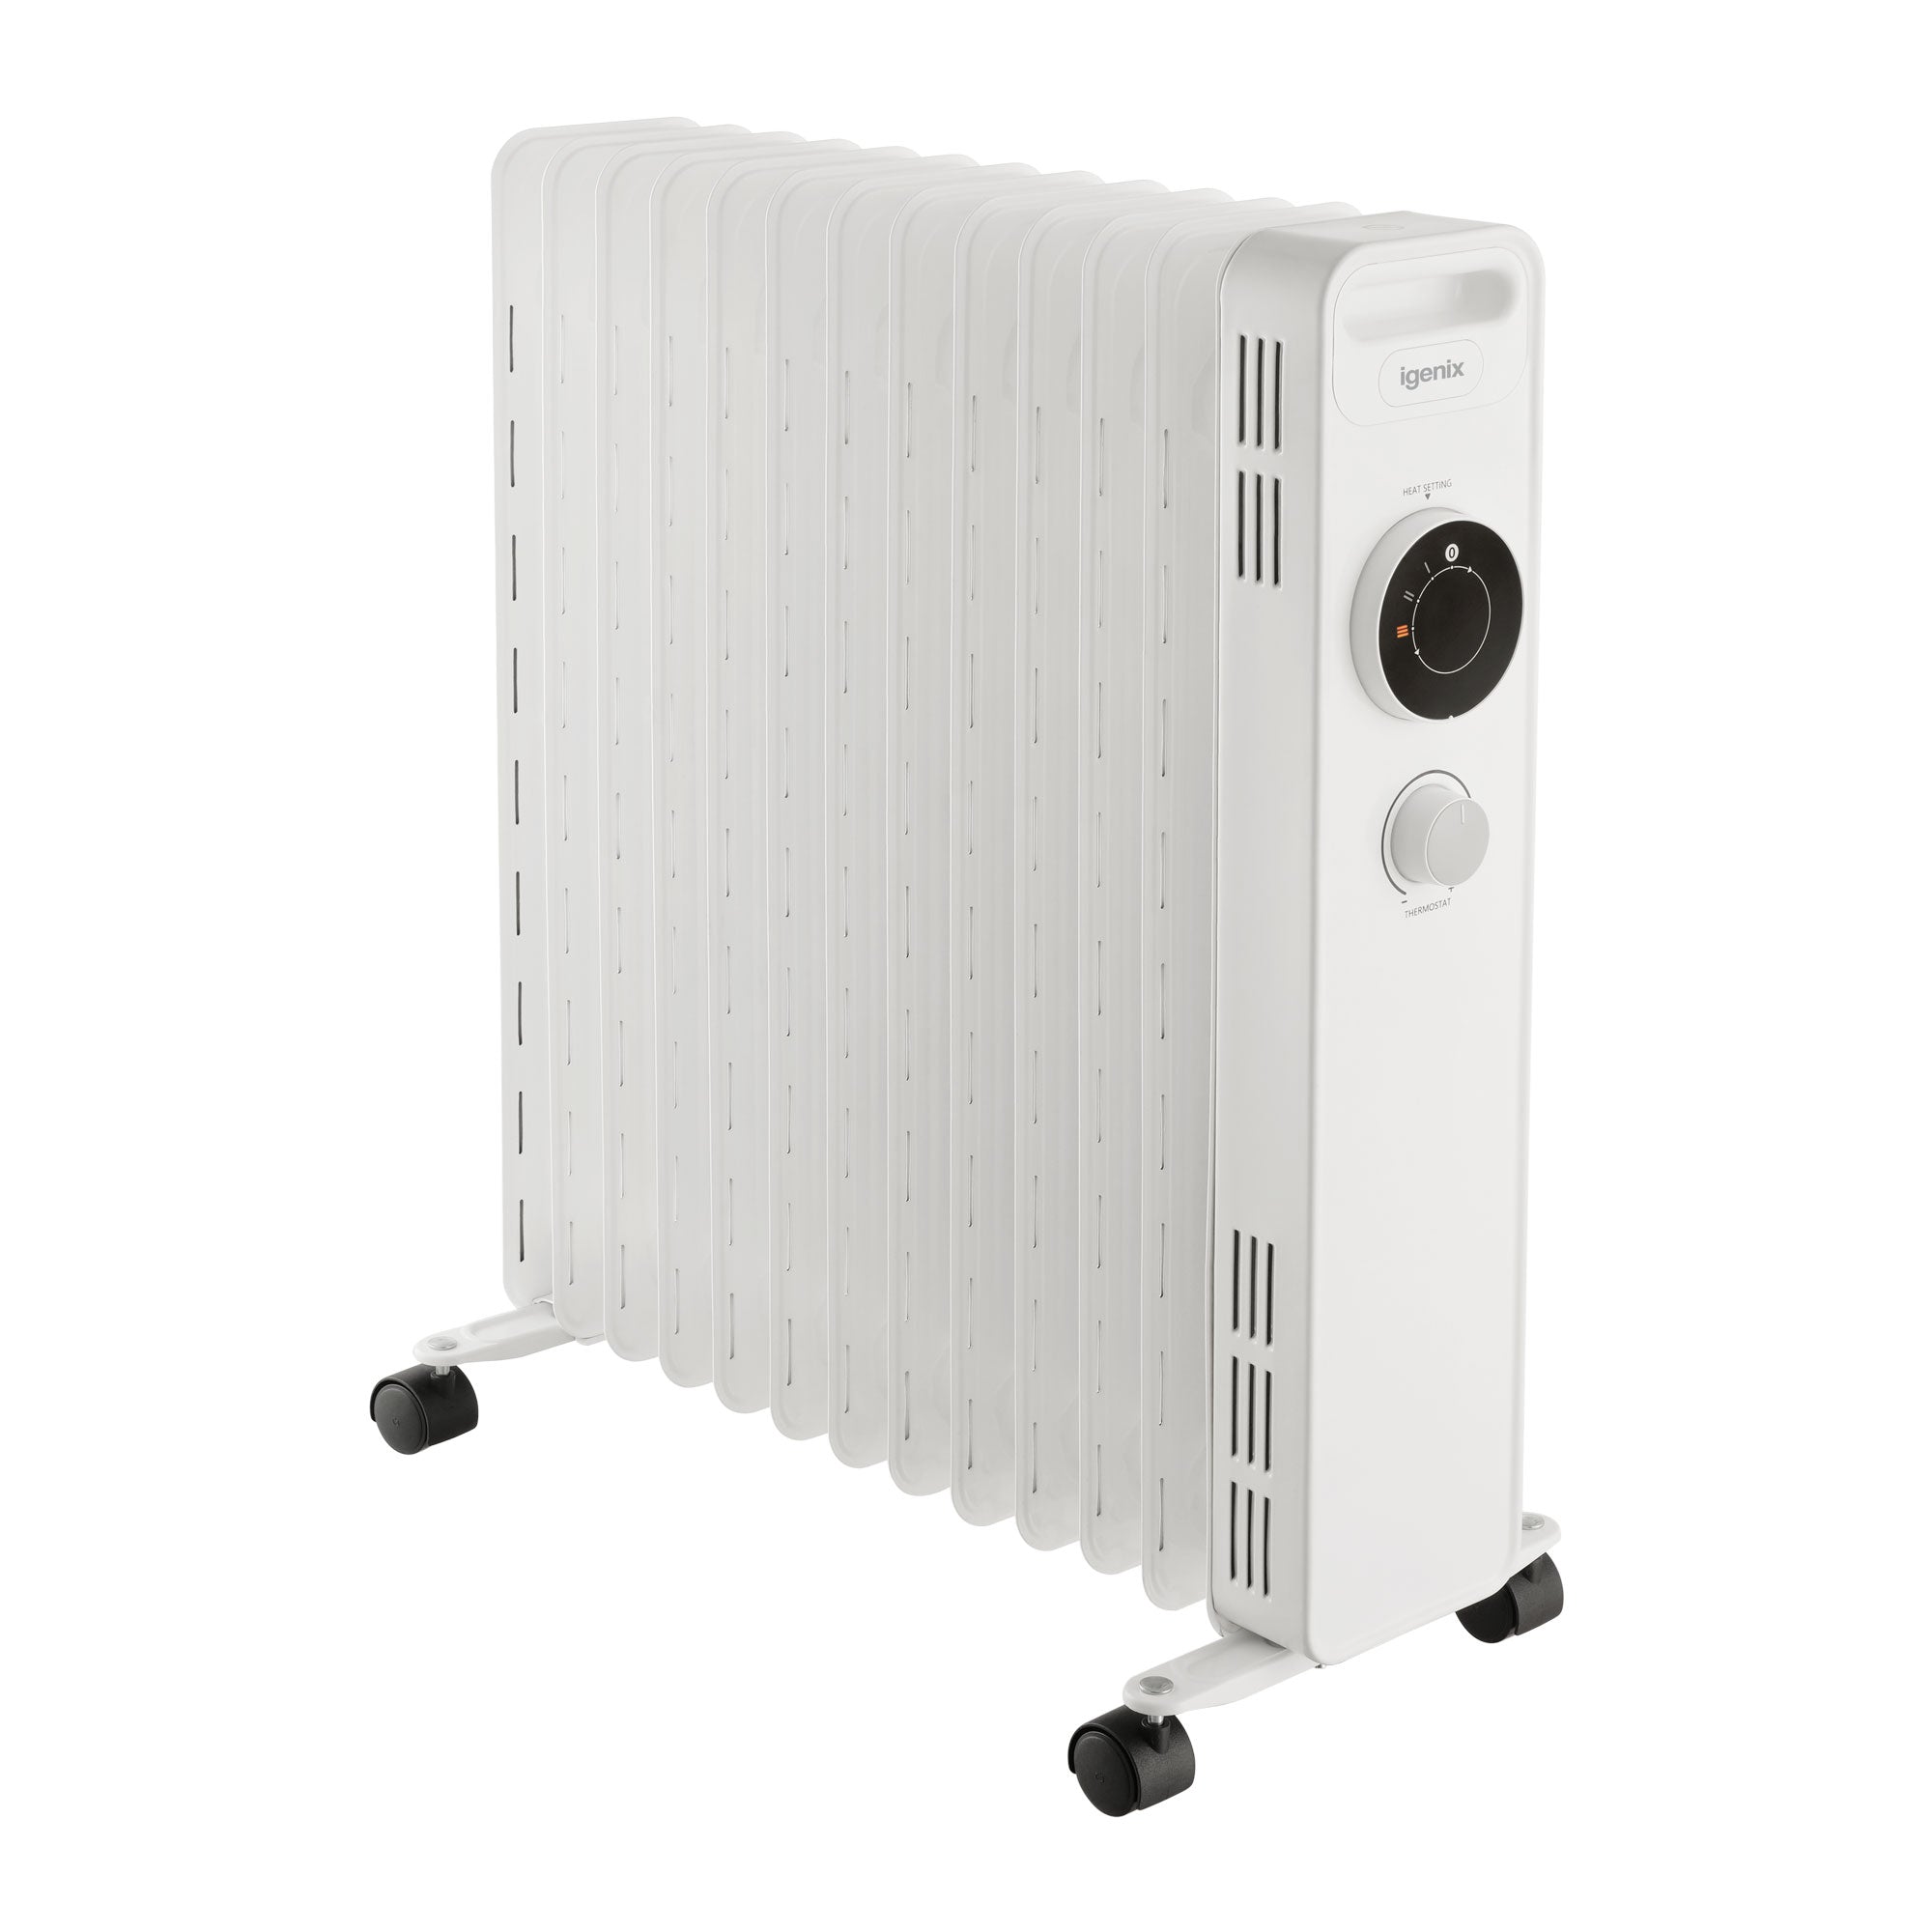 Oil Filled Radiator, 2.5kW/2500W, Overheat Protection, White